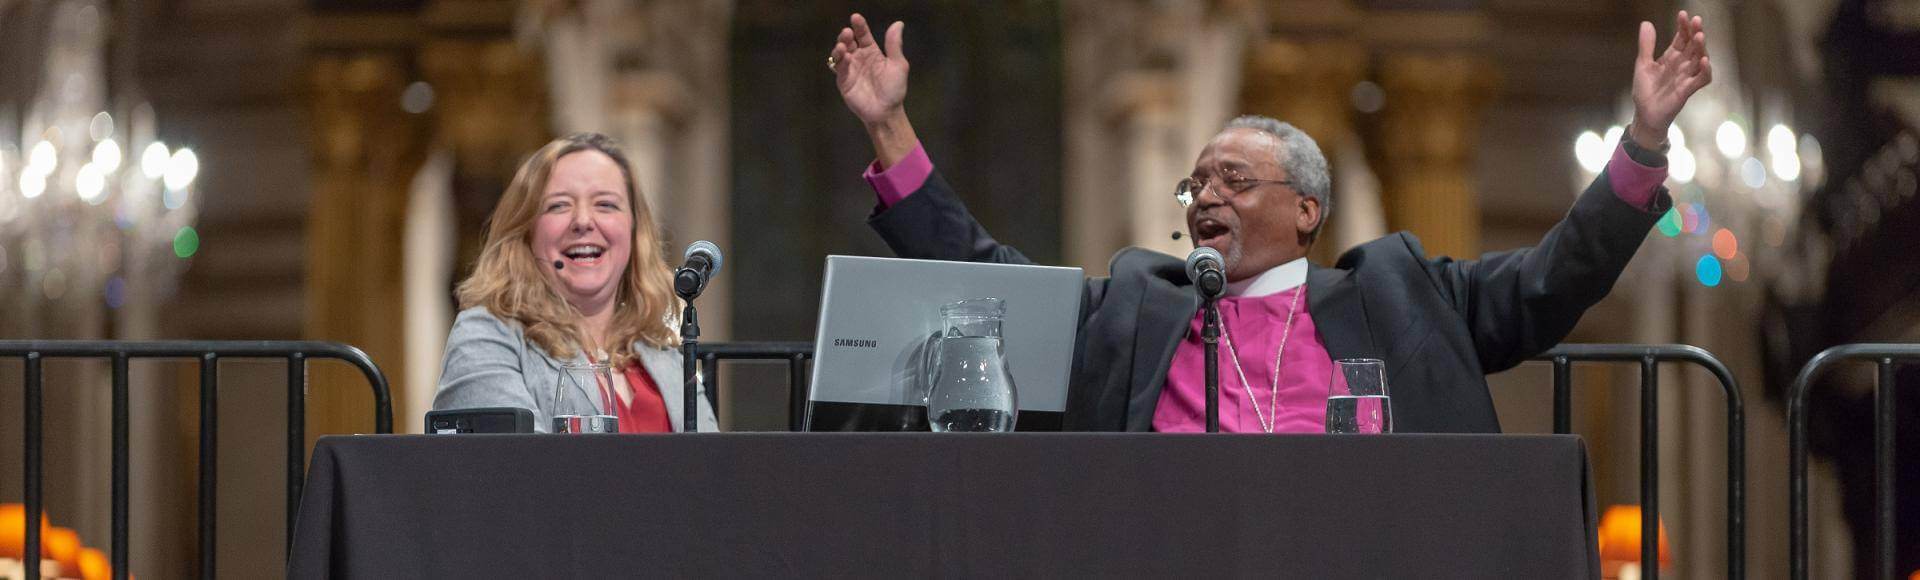 Bishop Curry raises his arms and Paula Gooder laughs alongside on the stage at an event at St Paul's Cathedral